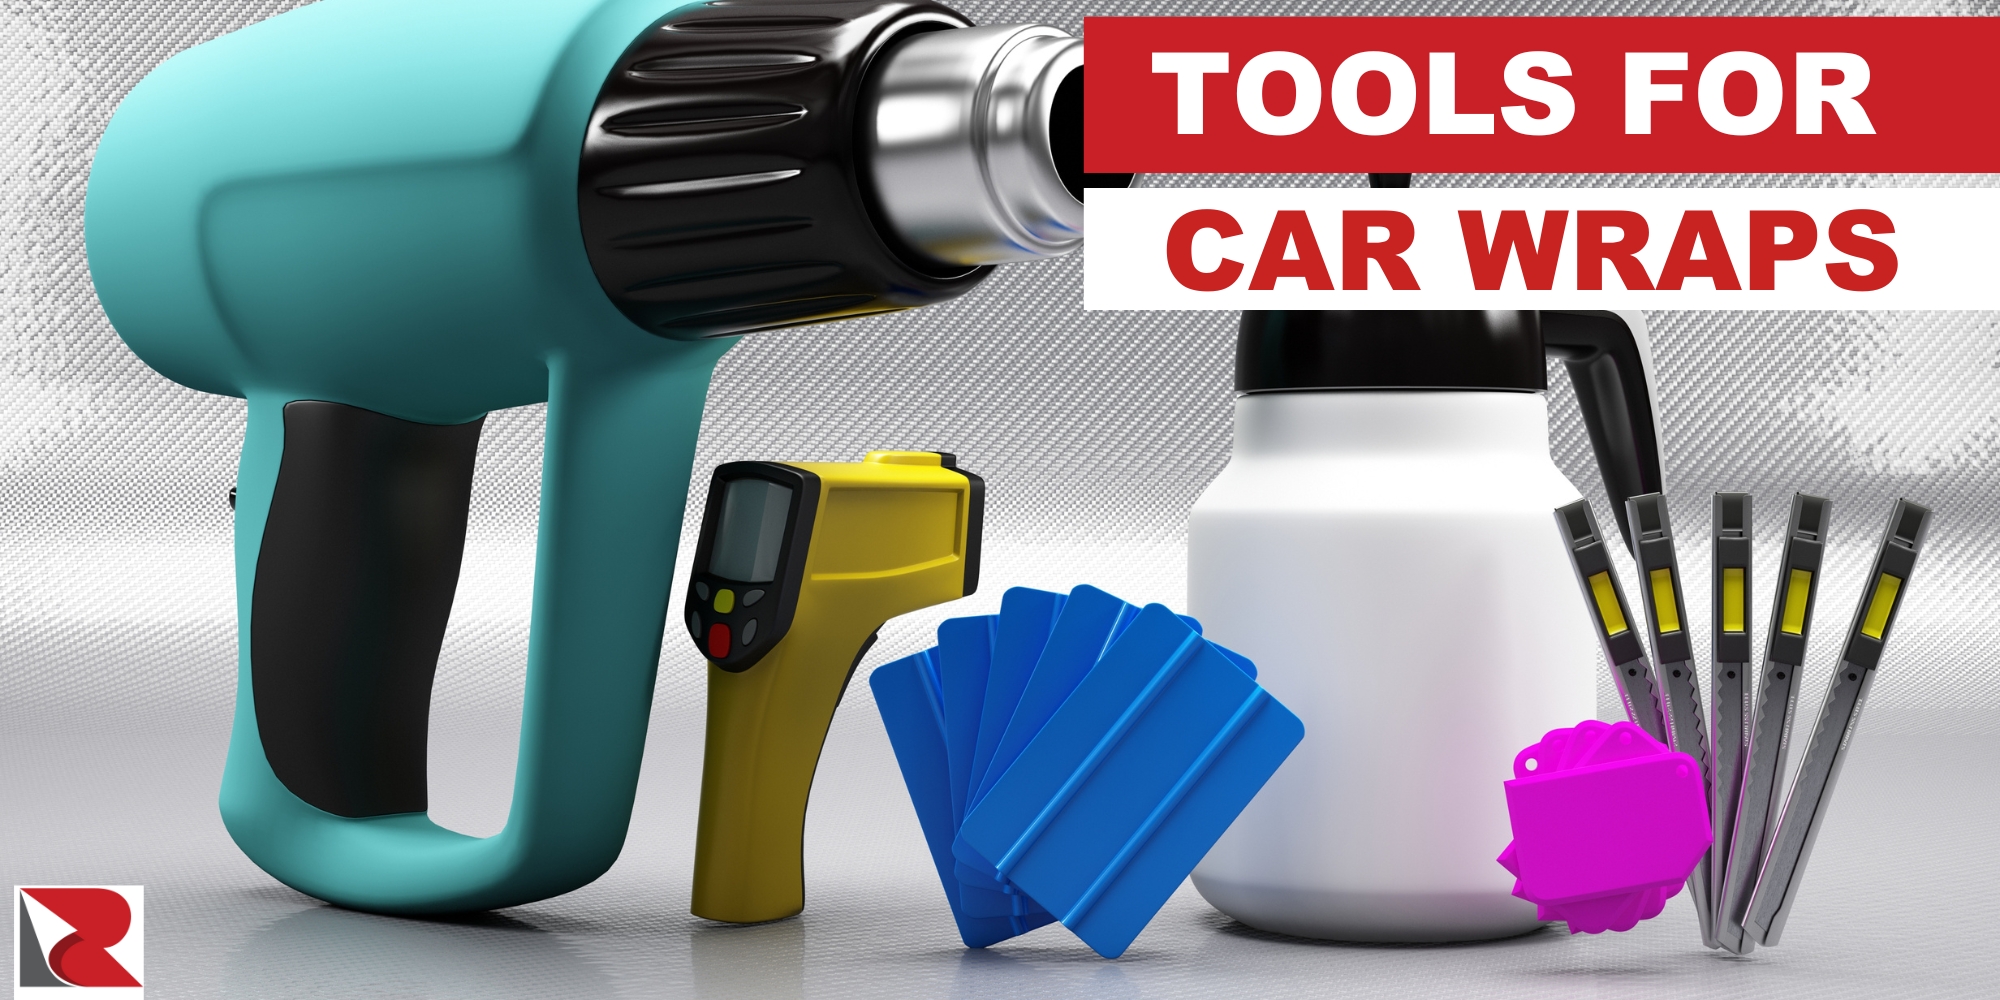 Tools You Need to Wrap a Car